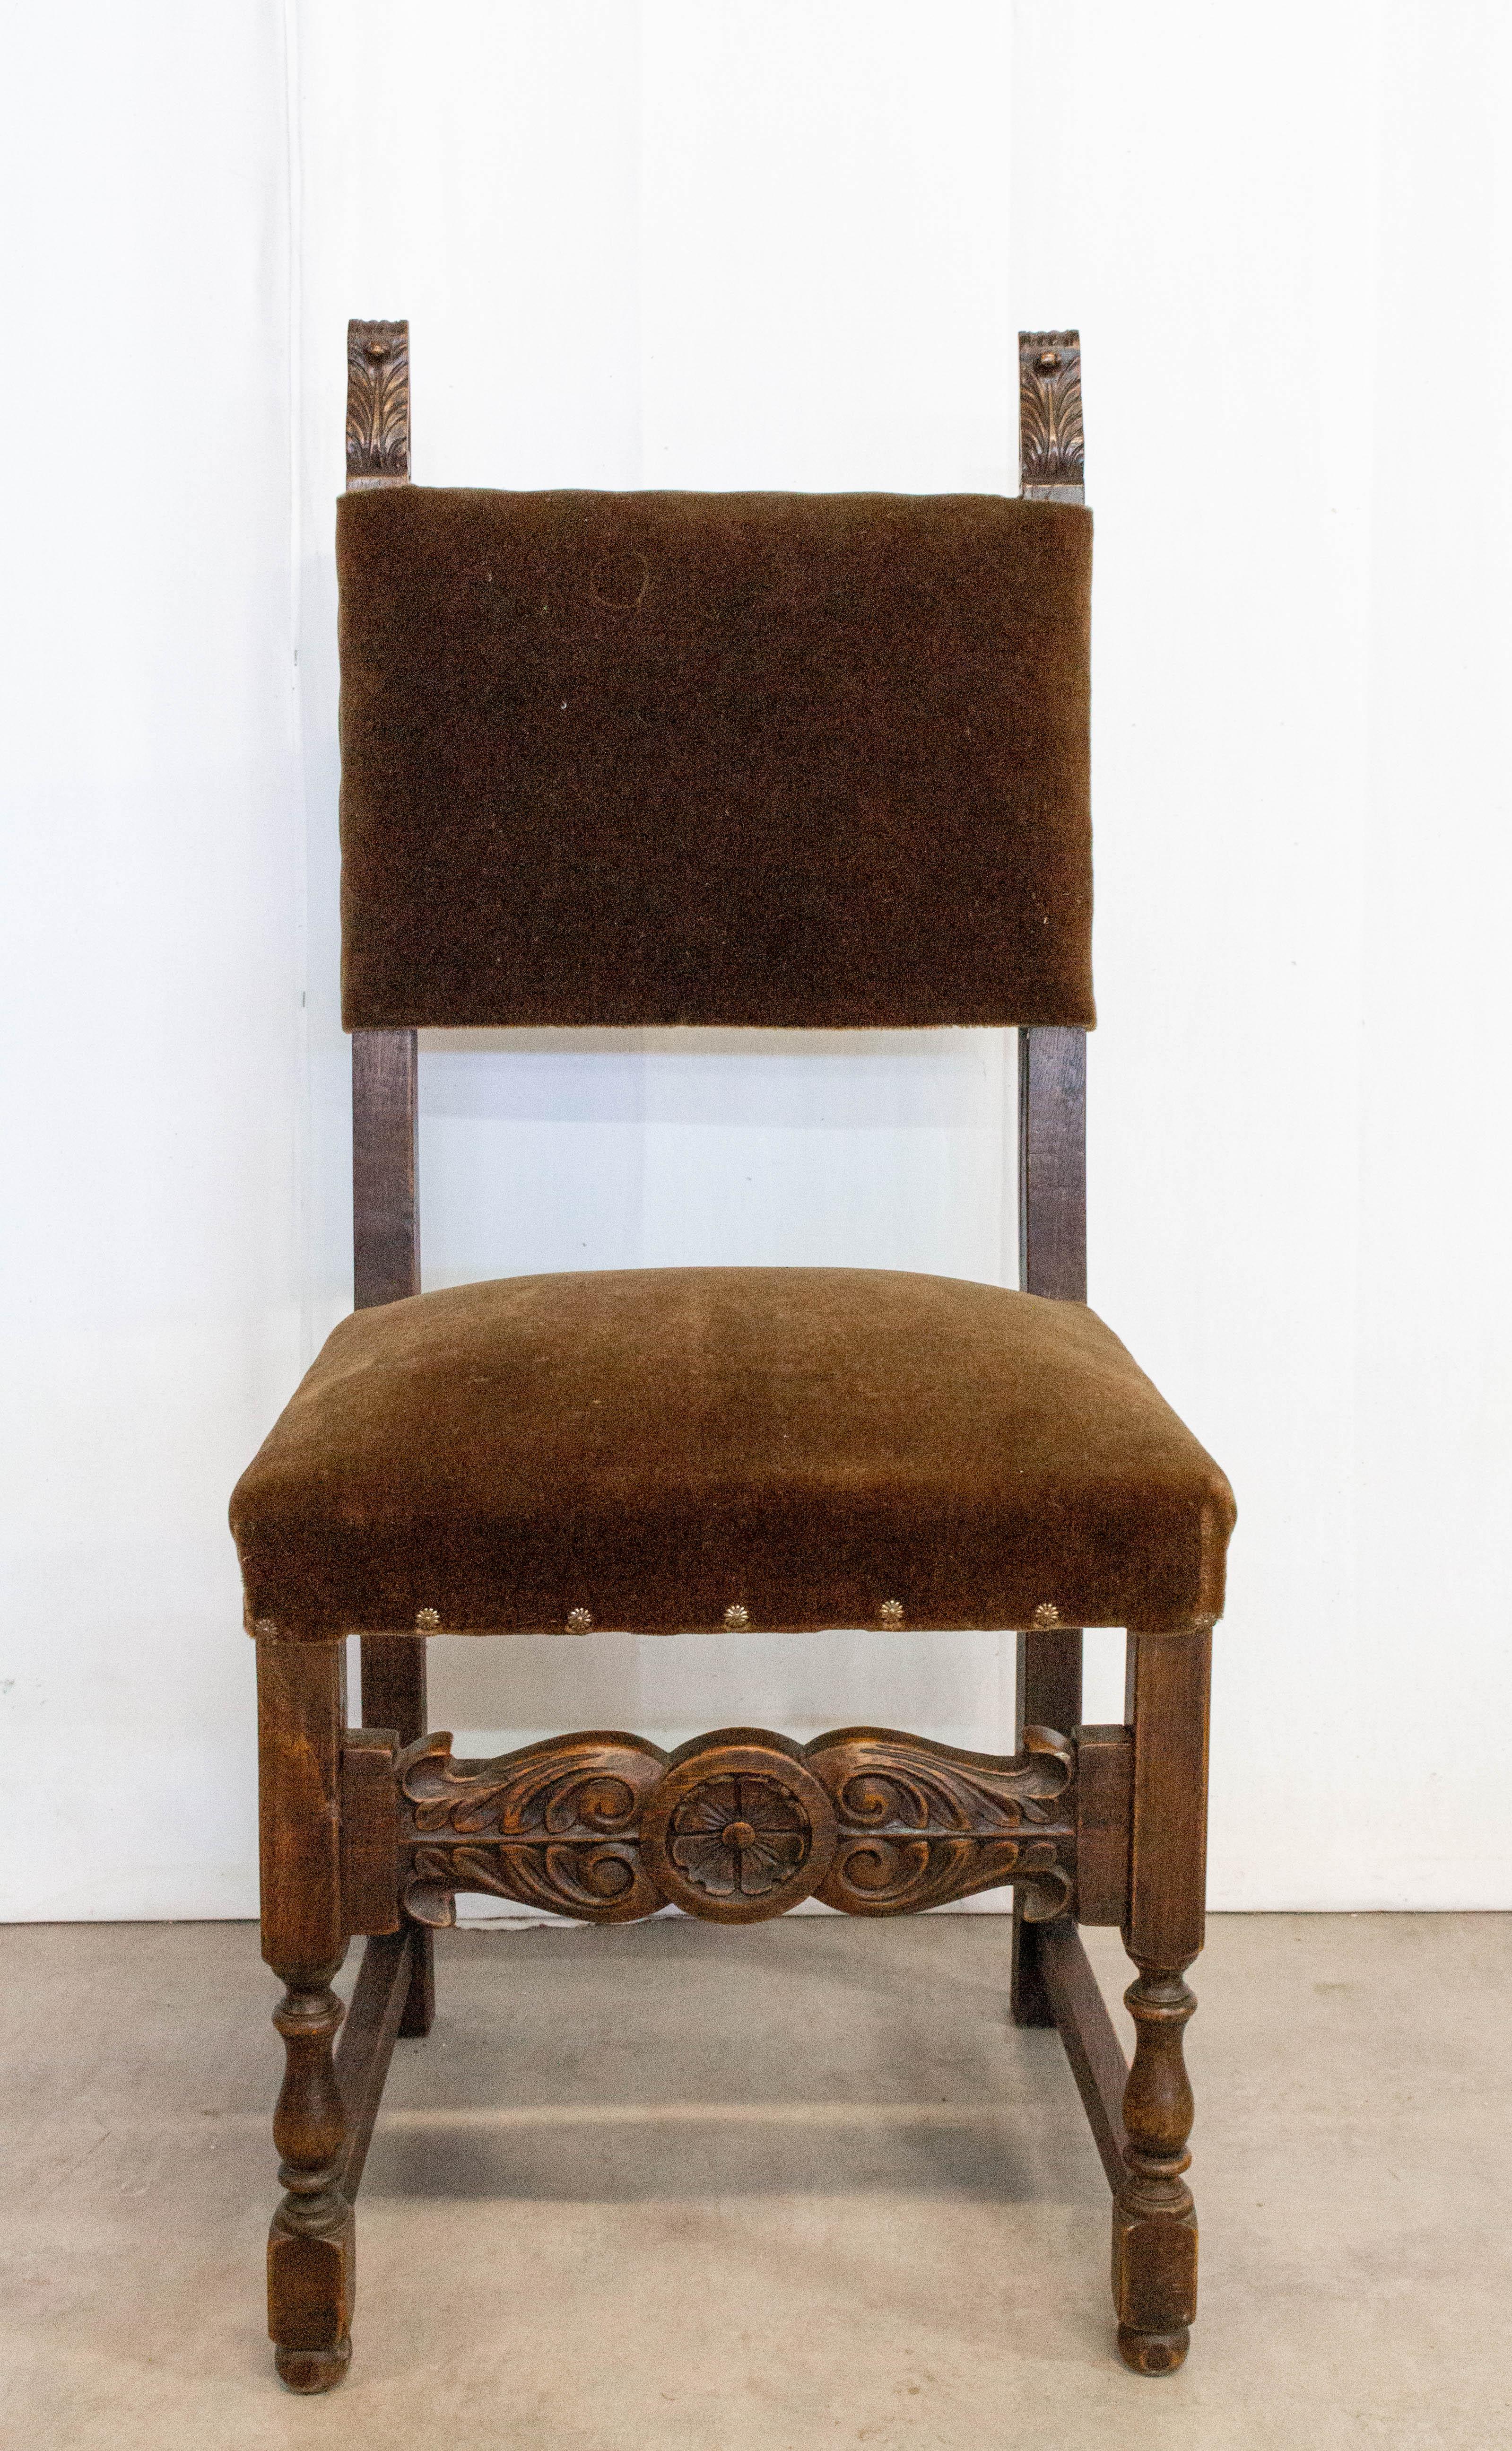 Six dining chairs vintage 20th century Spanish velvet brass studs oak
Greenish brown velvet
The quality of the fabric allows to keep the chairs in their original appearance. You can also change the velvet to suit your interior
Good condition with